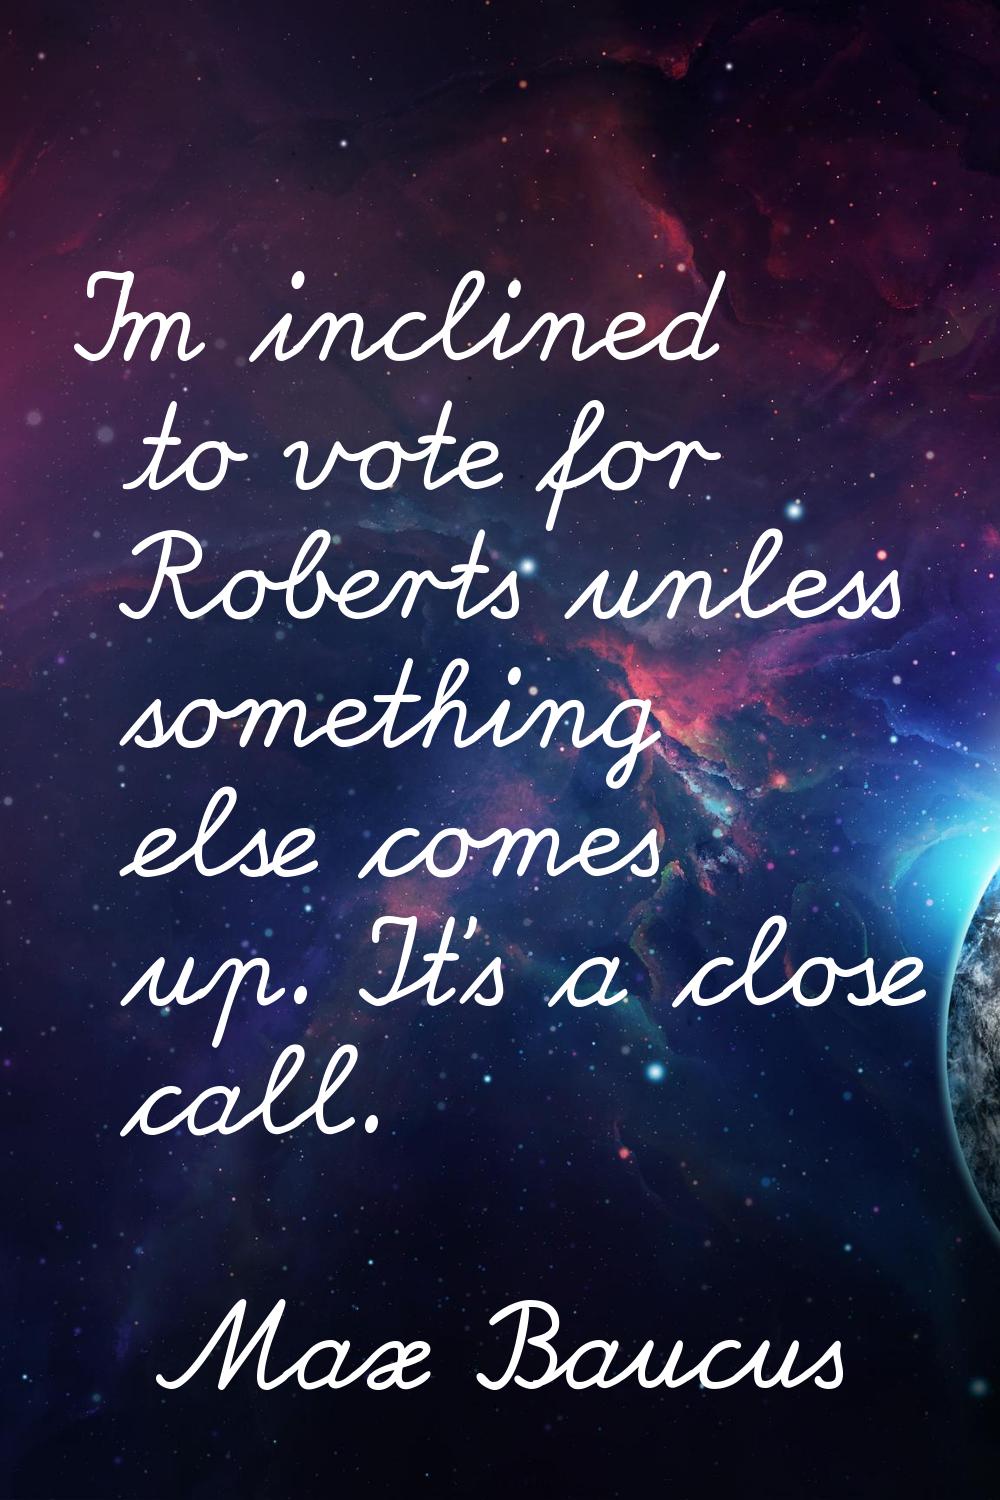 I'm inclined to vote for Roberts unless something else comes up. It's a close call.